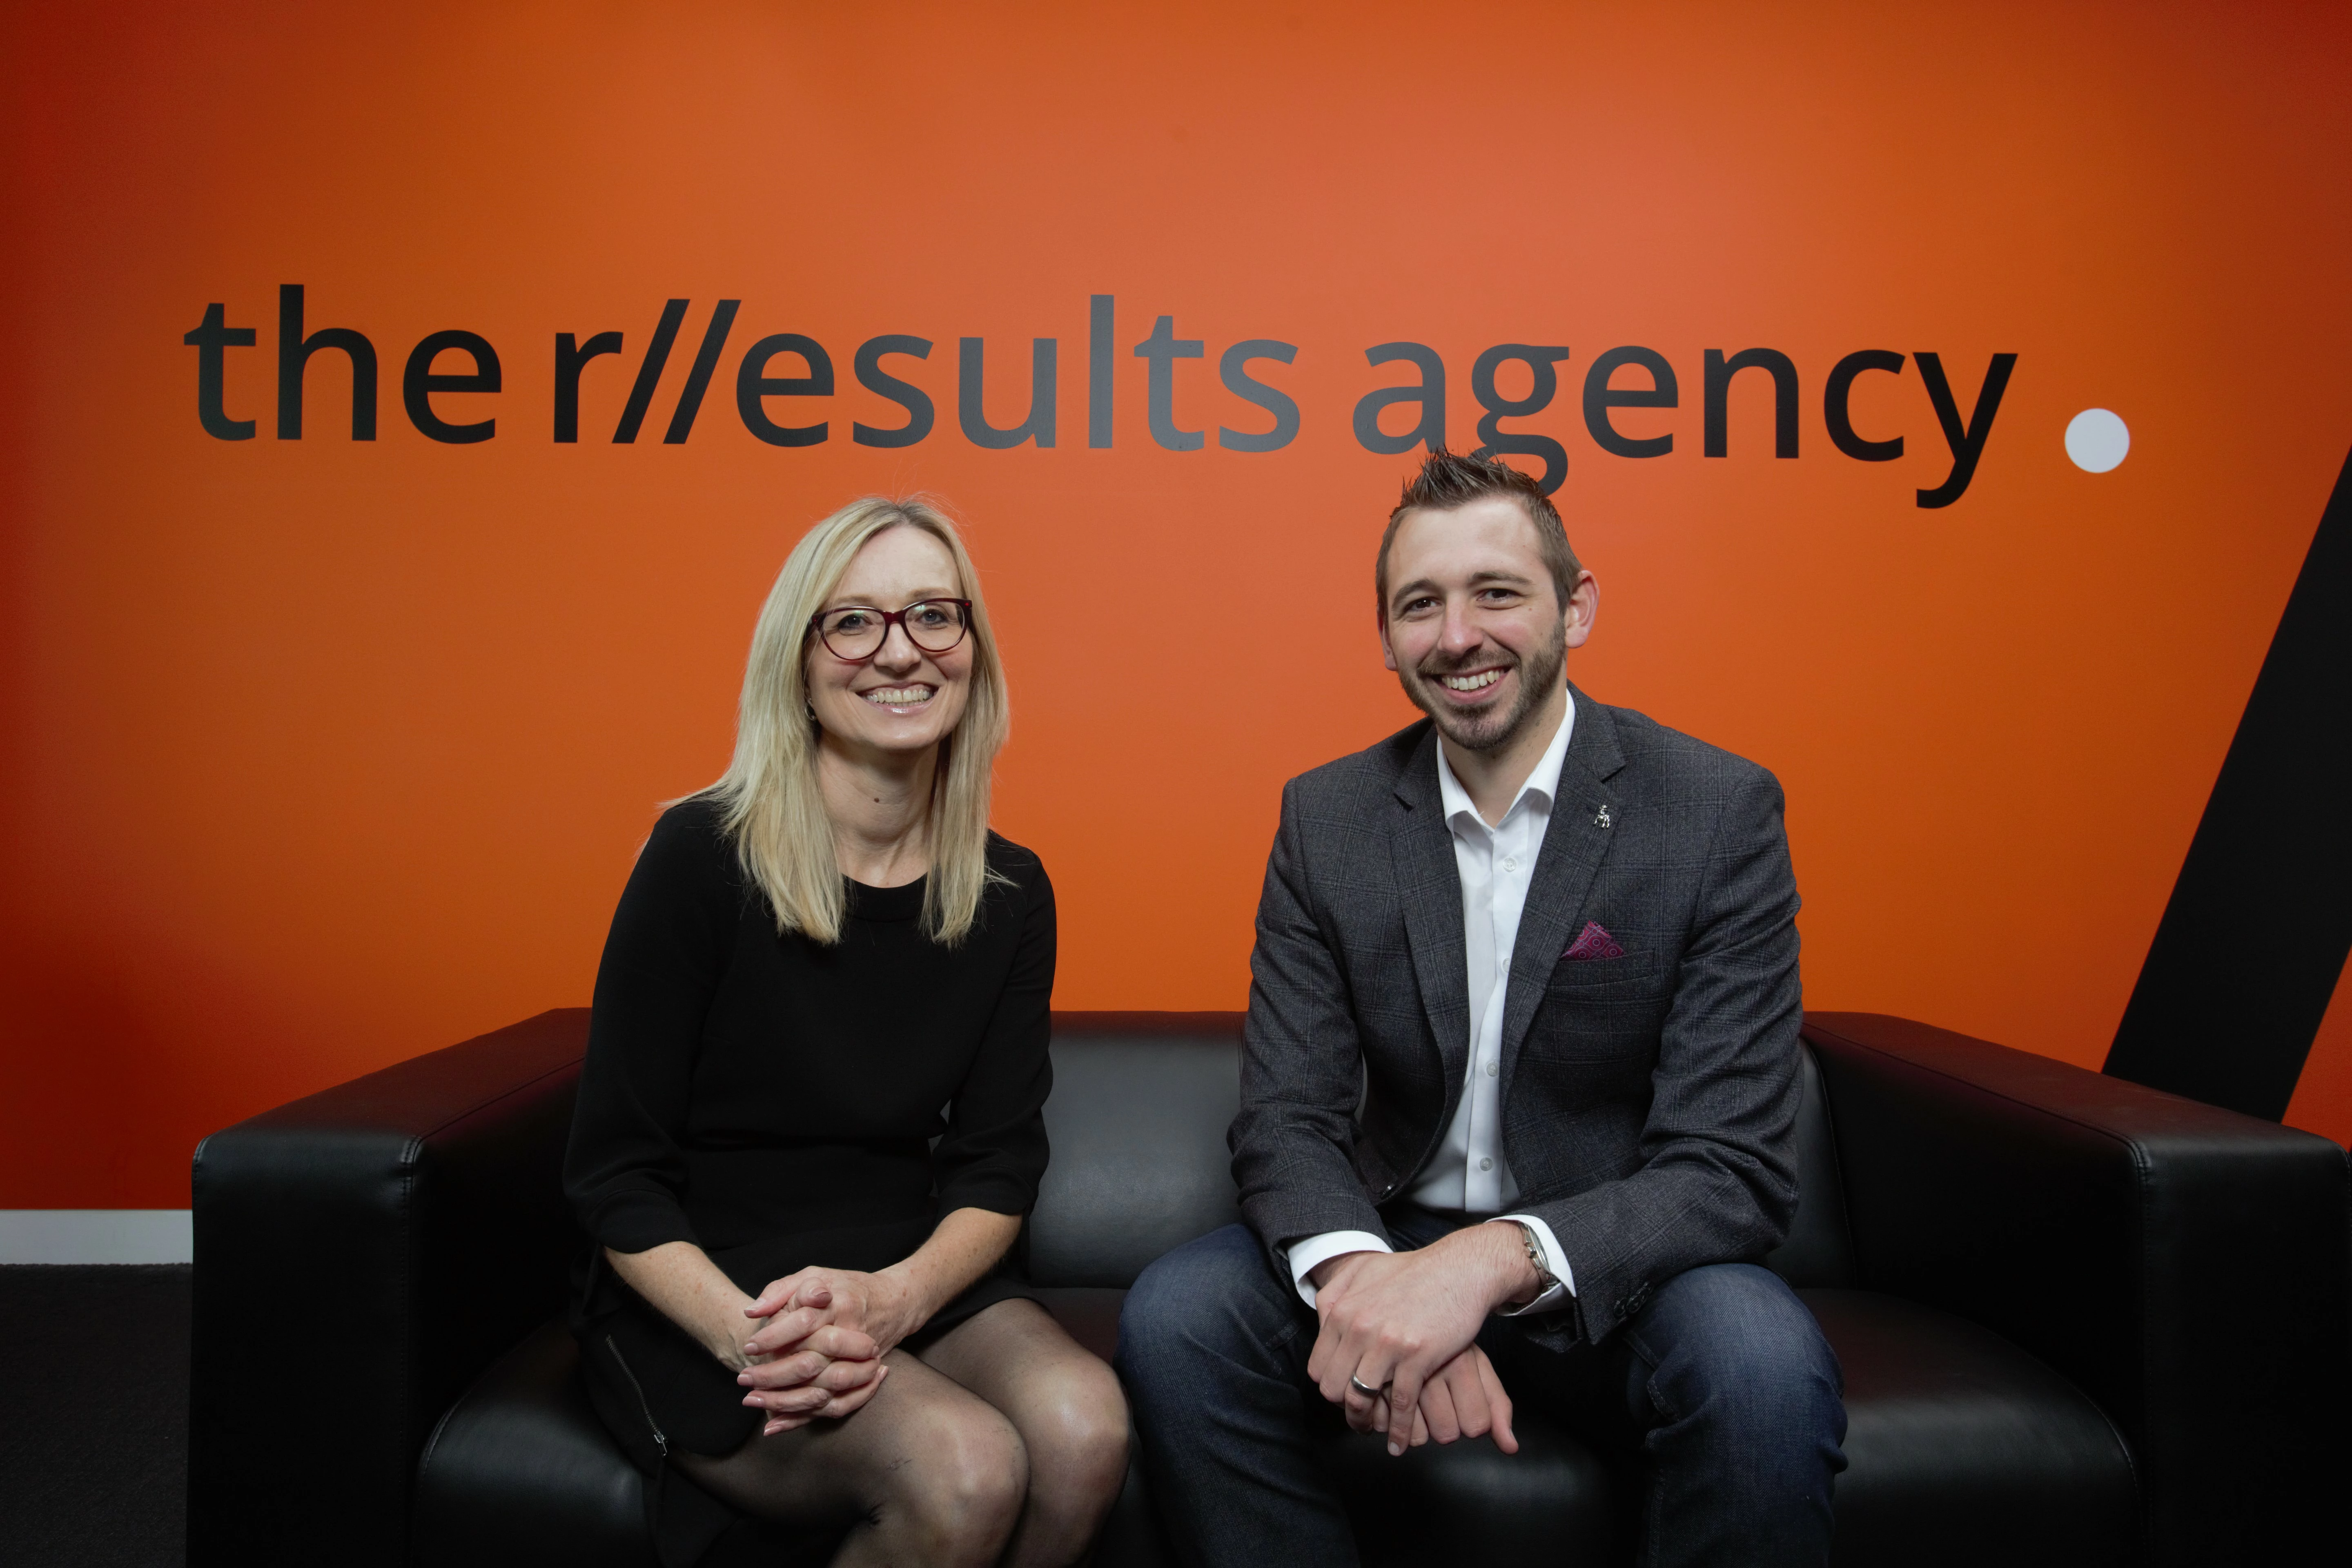 Revenue growth agency r-evolution expands with new Manchester office (L-R r-evolution MD Gill Burgess and Director Adam Blenkinsop)